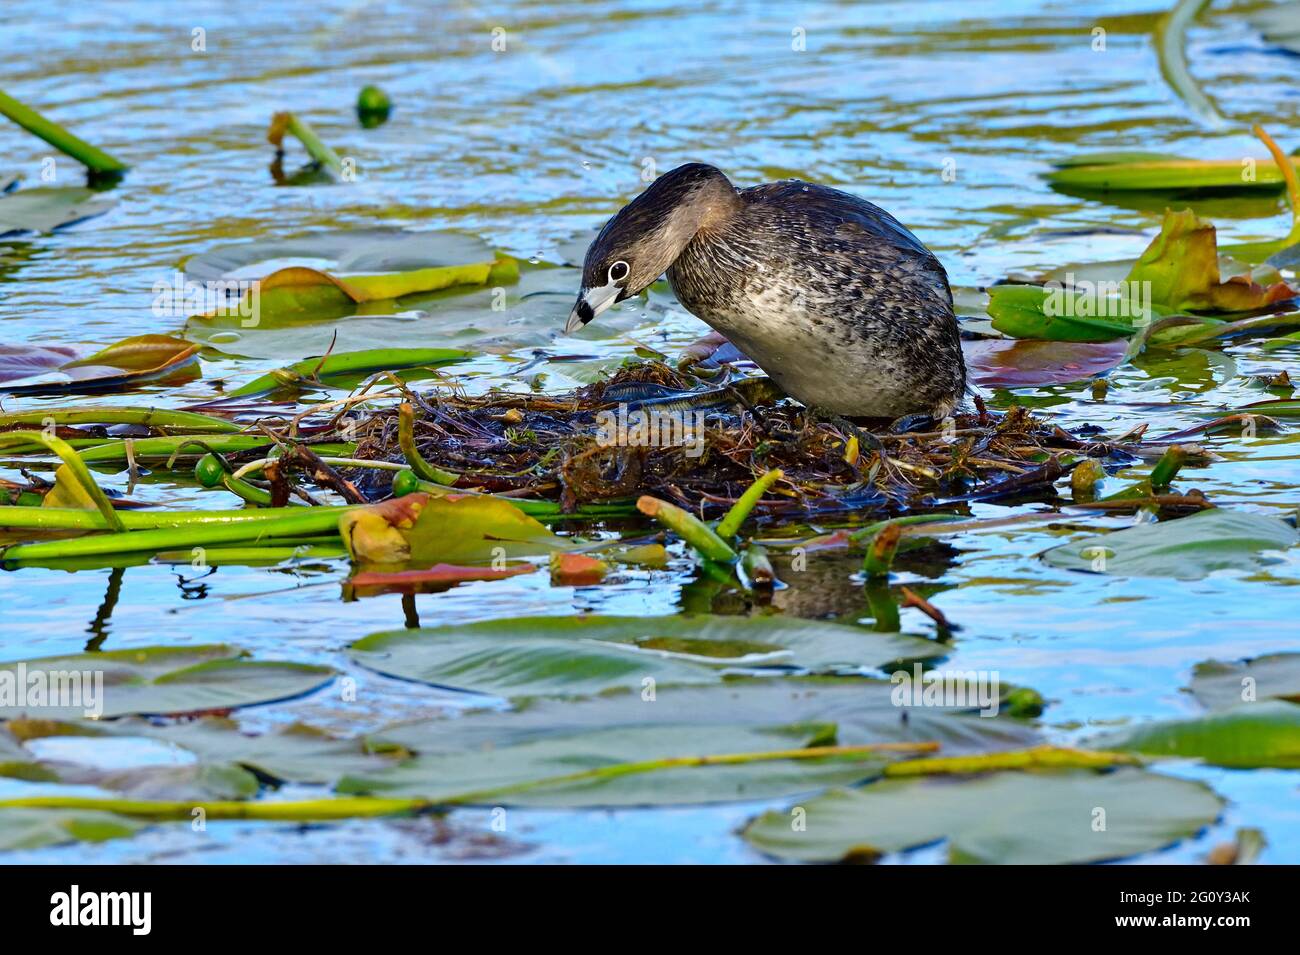 A female Pied-billed Grebe 'Podilymbus podiceps'; building  a floating nest made of lily pads at the marshy area in a rural Alberta Lake Stock Photo